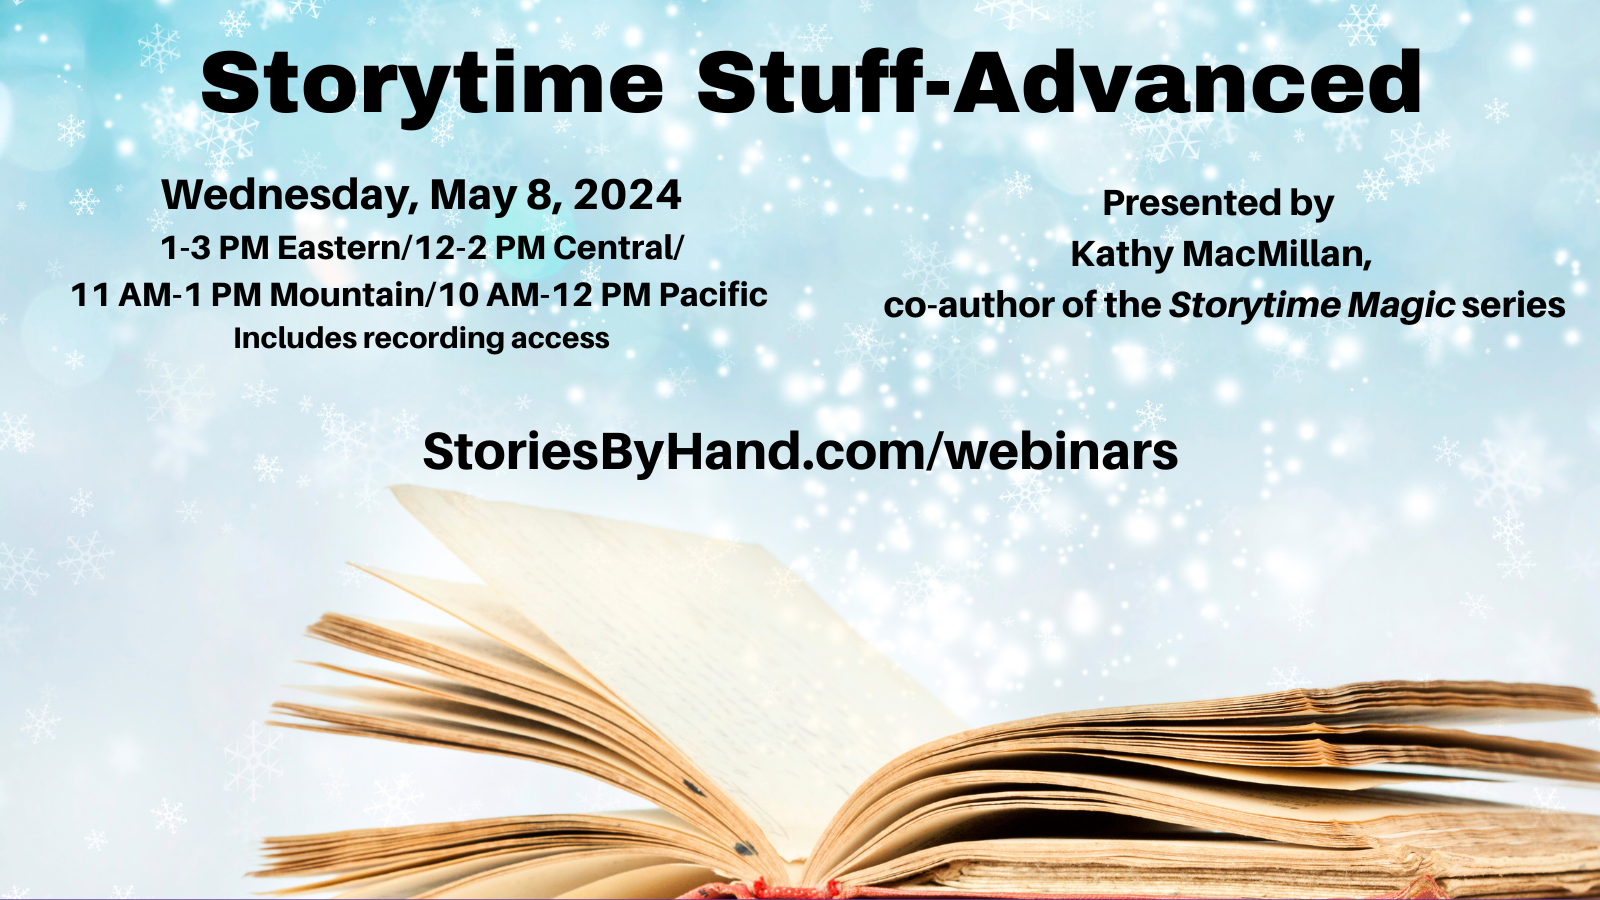 Graphic shows an open book with magical sparkles rising from it. Text reads: Storytime Stuff – Advanced. Wednesday, May 8, 2024. 1-3 PM Eastern/12-2 PM Central/11 AM-1 PM Mountain/10 AM-12 PM Pacific. Online session via Zoom (2-hour webinar). Includes recording access. Presented by Kathy MacMillan, co-author of the Storytime Magic series. Register at StoriesByhand.com/webinars.